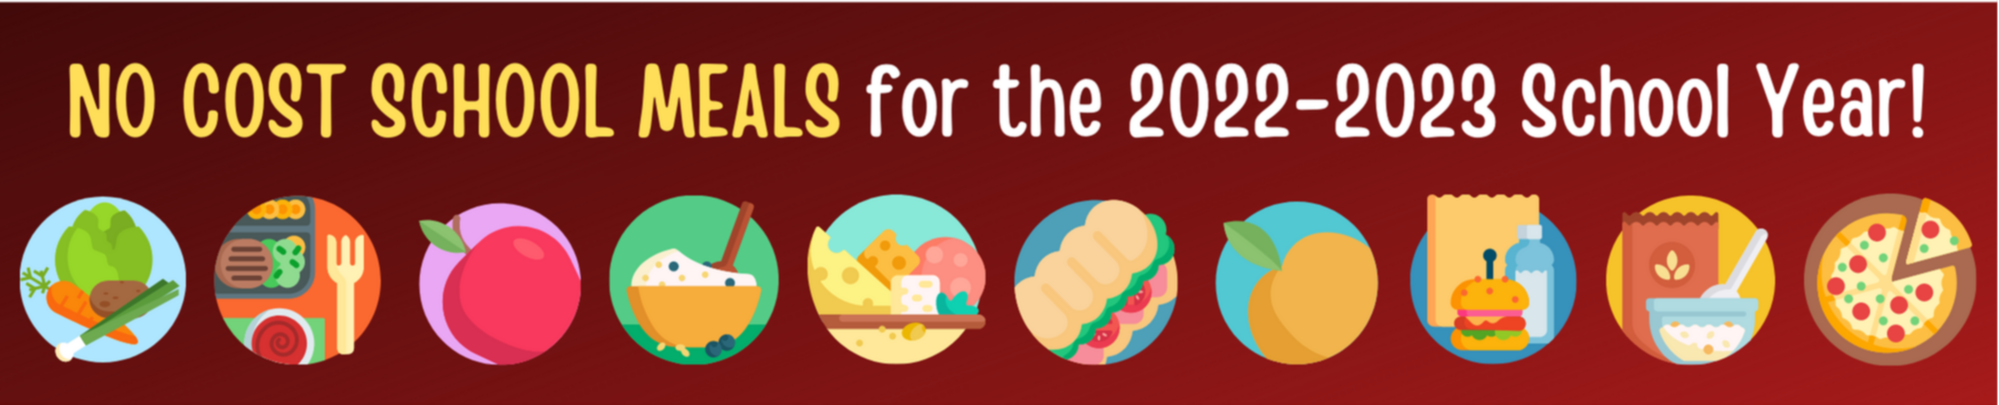 No Cost School Meals for 2022-23, Food Icons, Vegetables, Fruit, Yogurt, Sandwich, Pizza, Cereal, Meat and Cheese